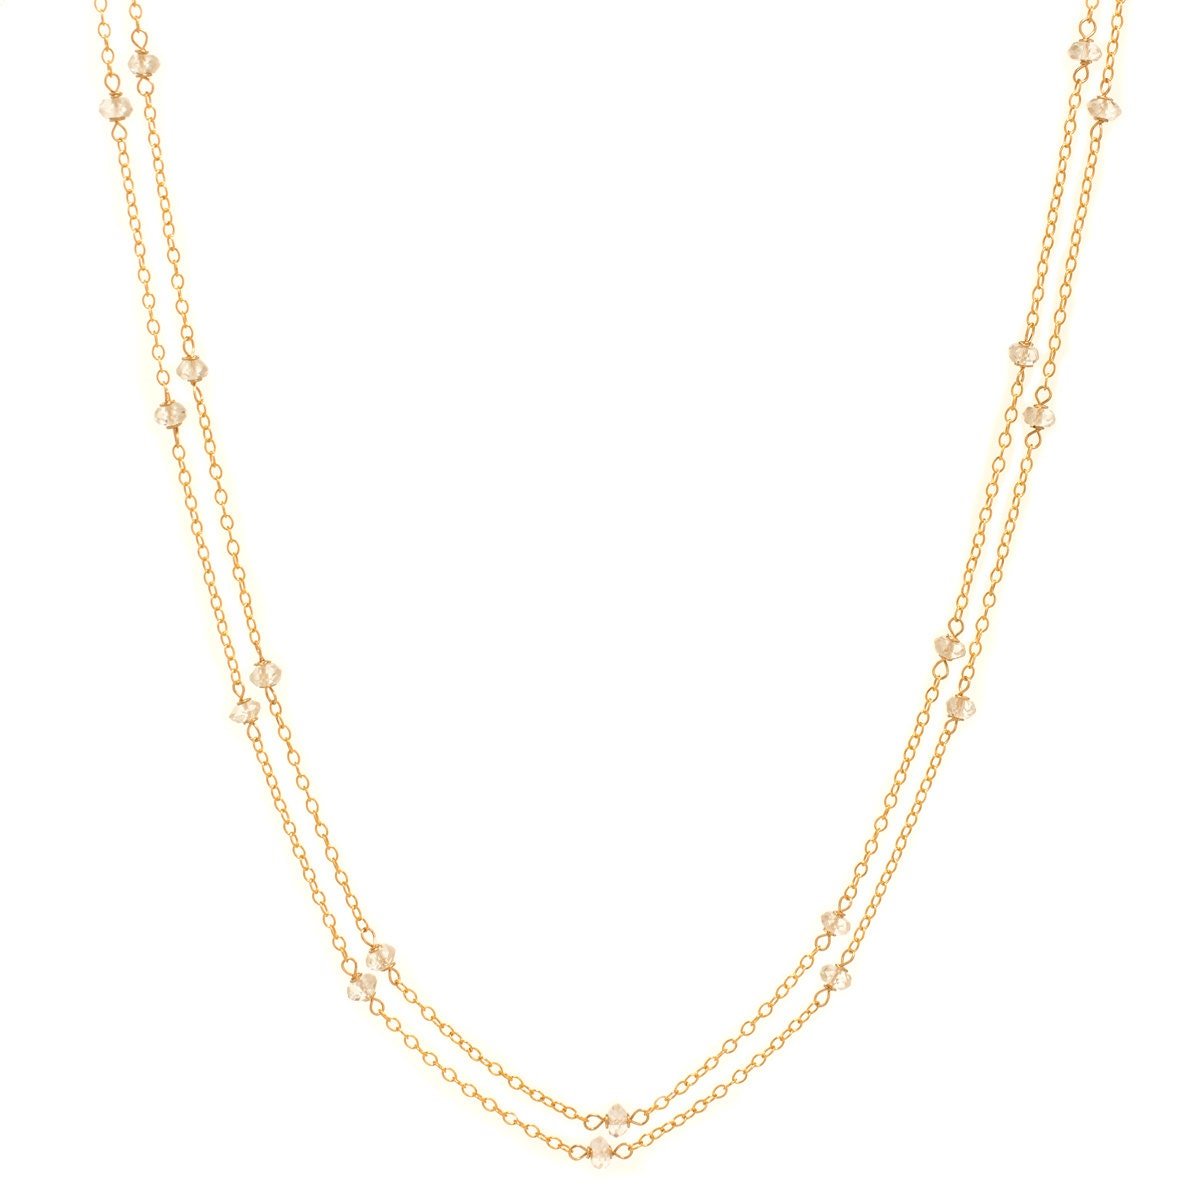 White Topaz and Gold Chain Necklace - Extra Long 46in. Necklace - 14k ...